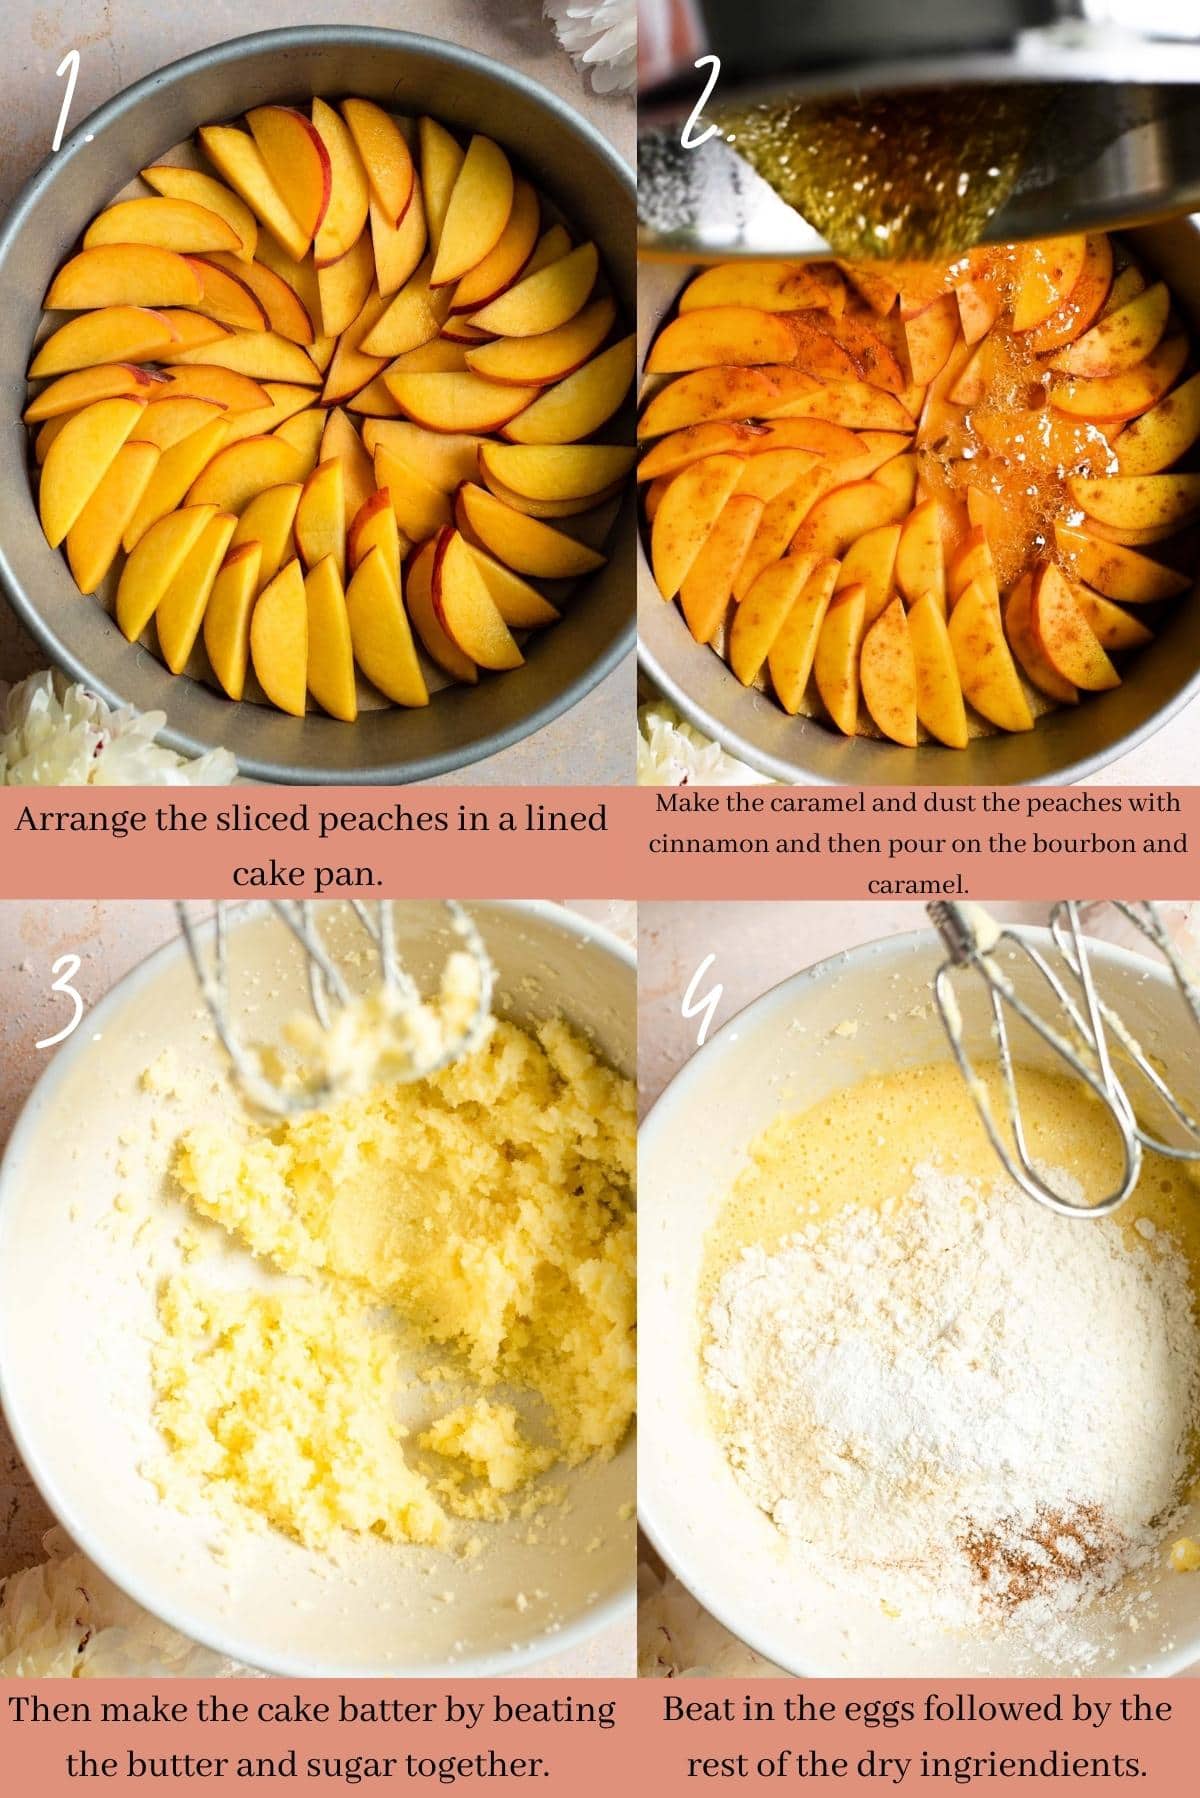 A collage showing the steps to make a peach upside down cake.